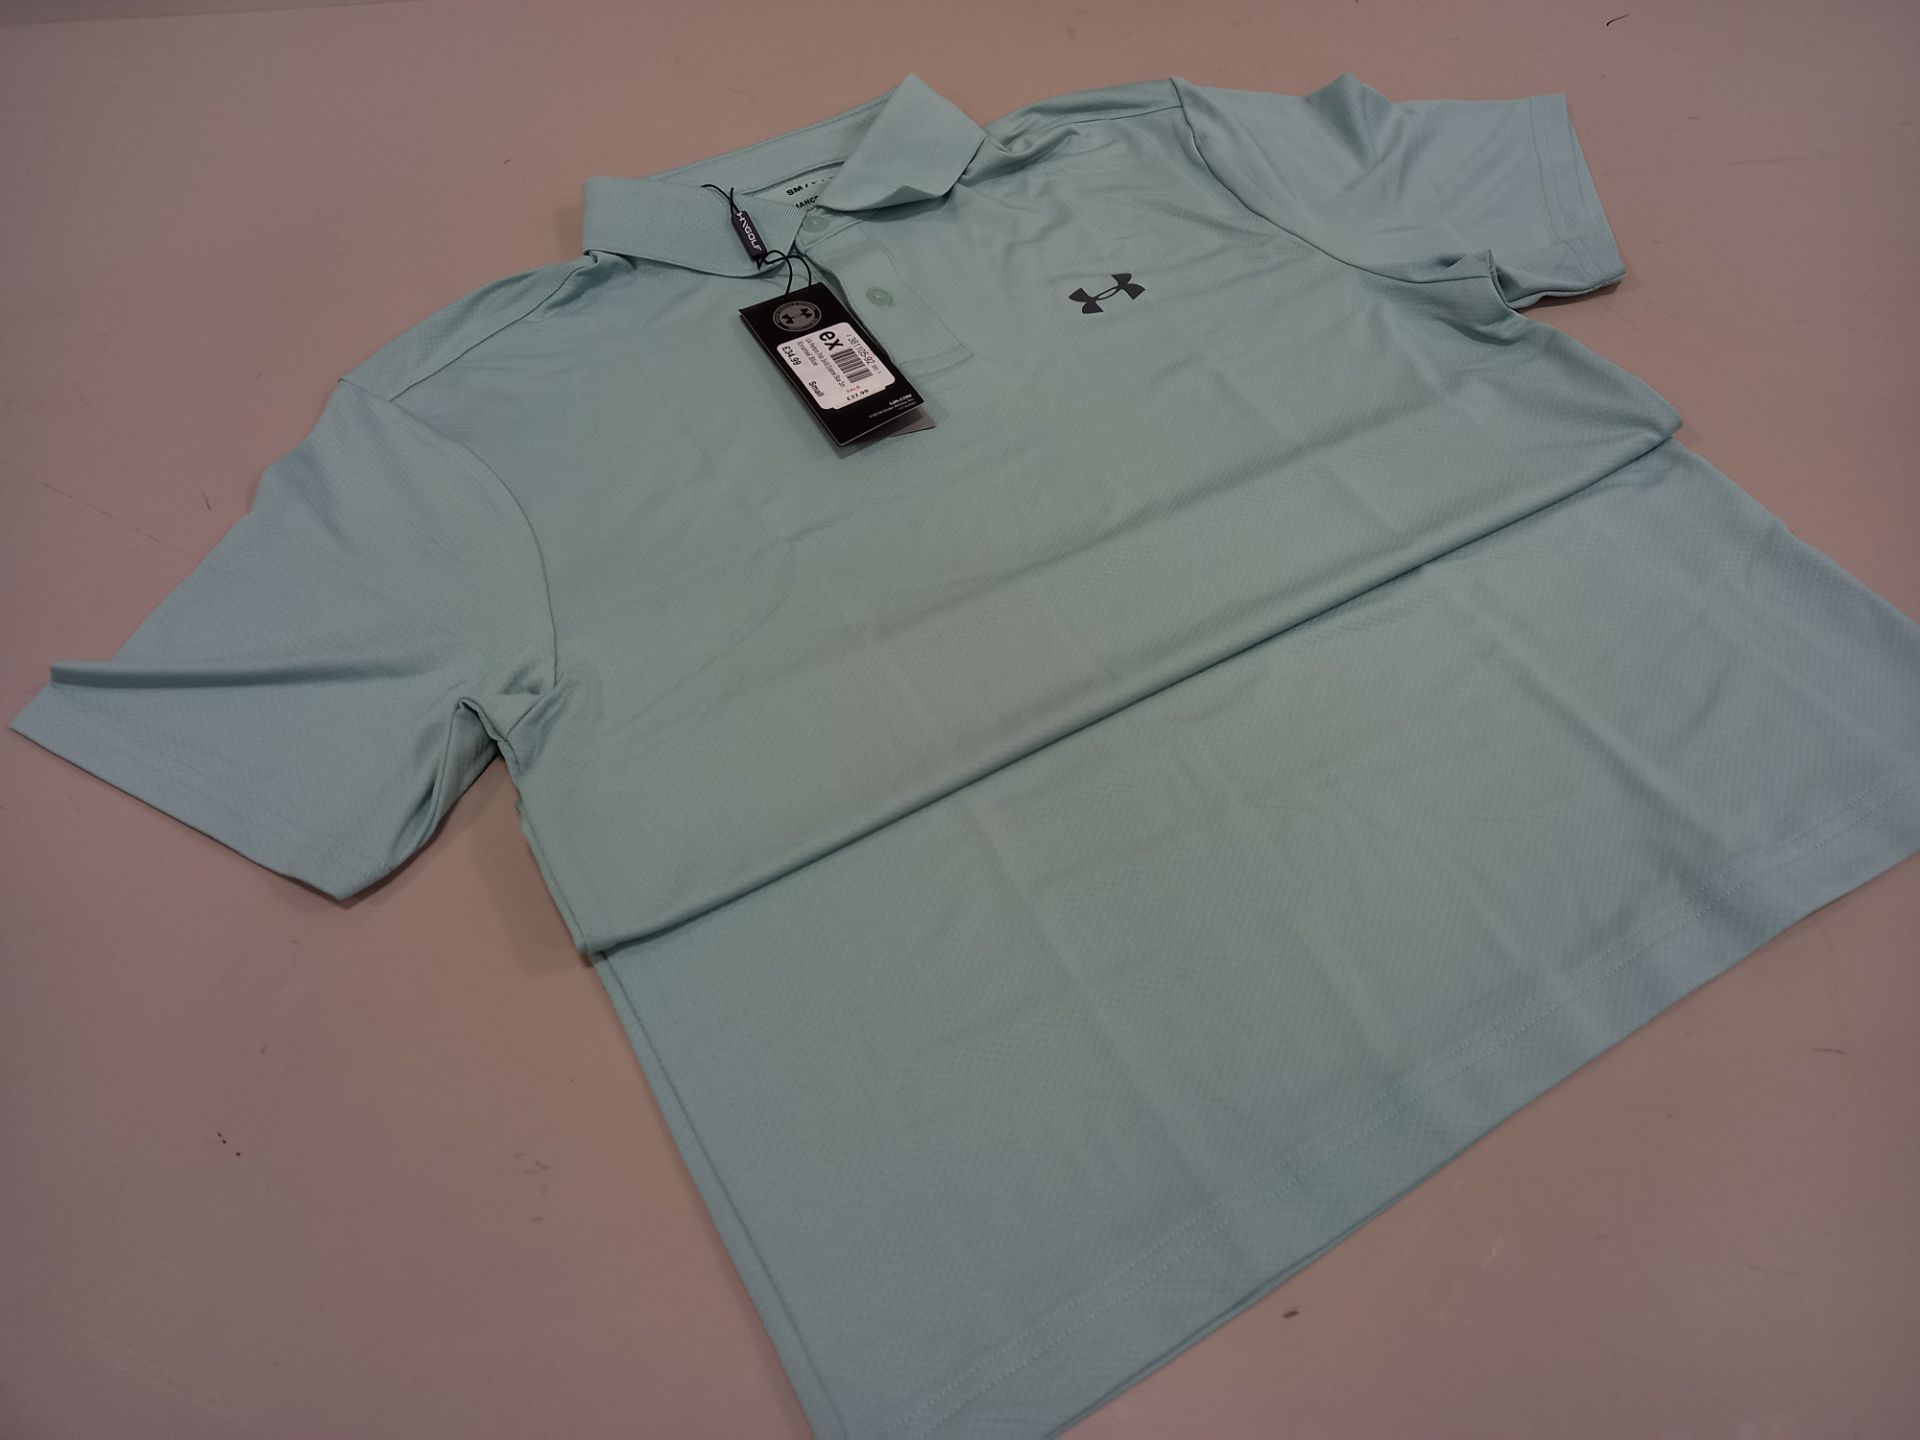 12 X BRAND NEW UNDER ARMOUR BAGGED PERFORM POLO SHIRT SIZE SMALL AND LARGE (PICK LOOSE)